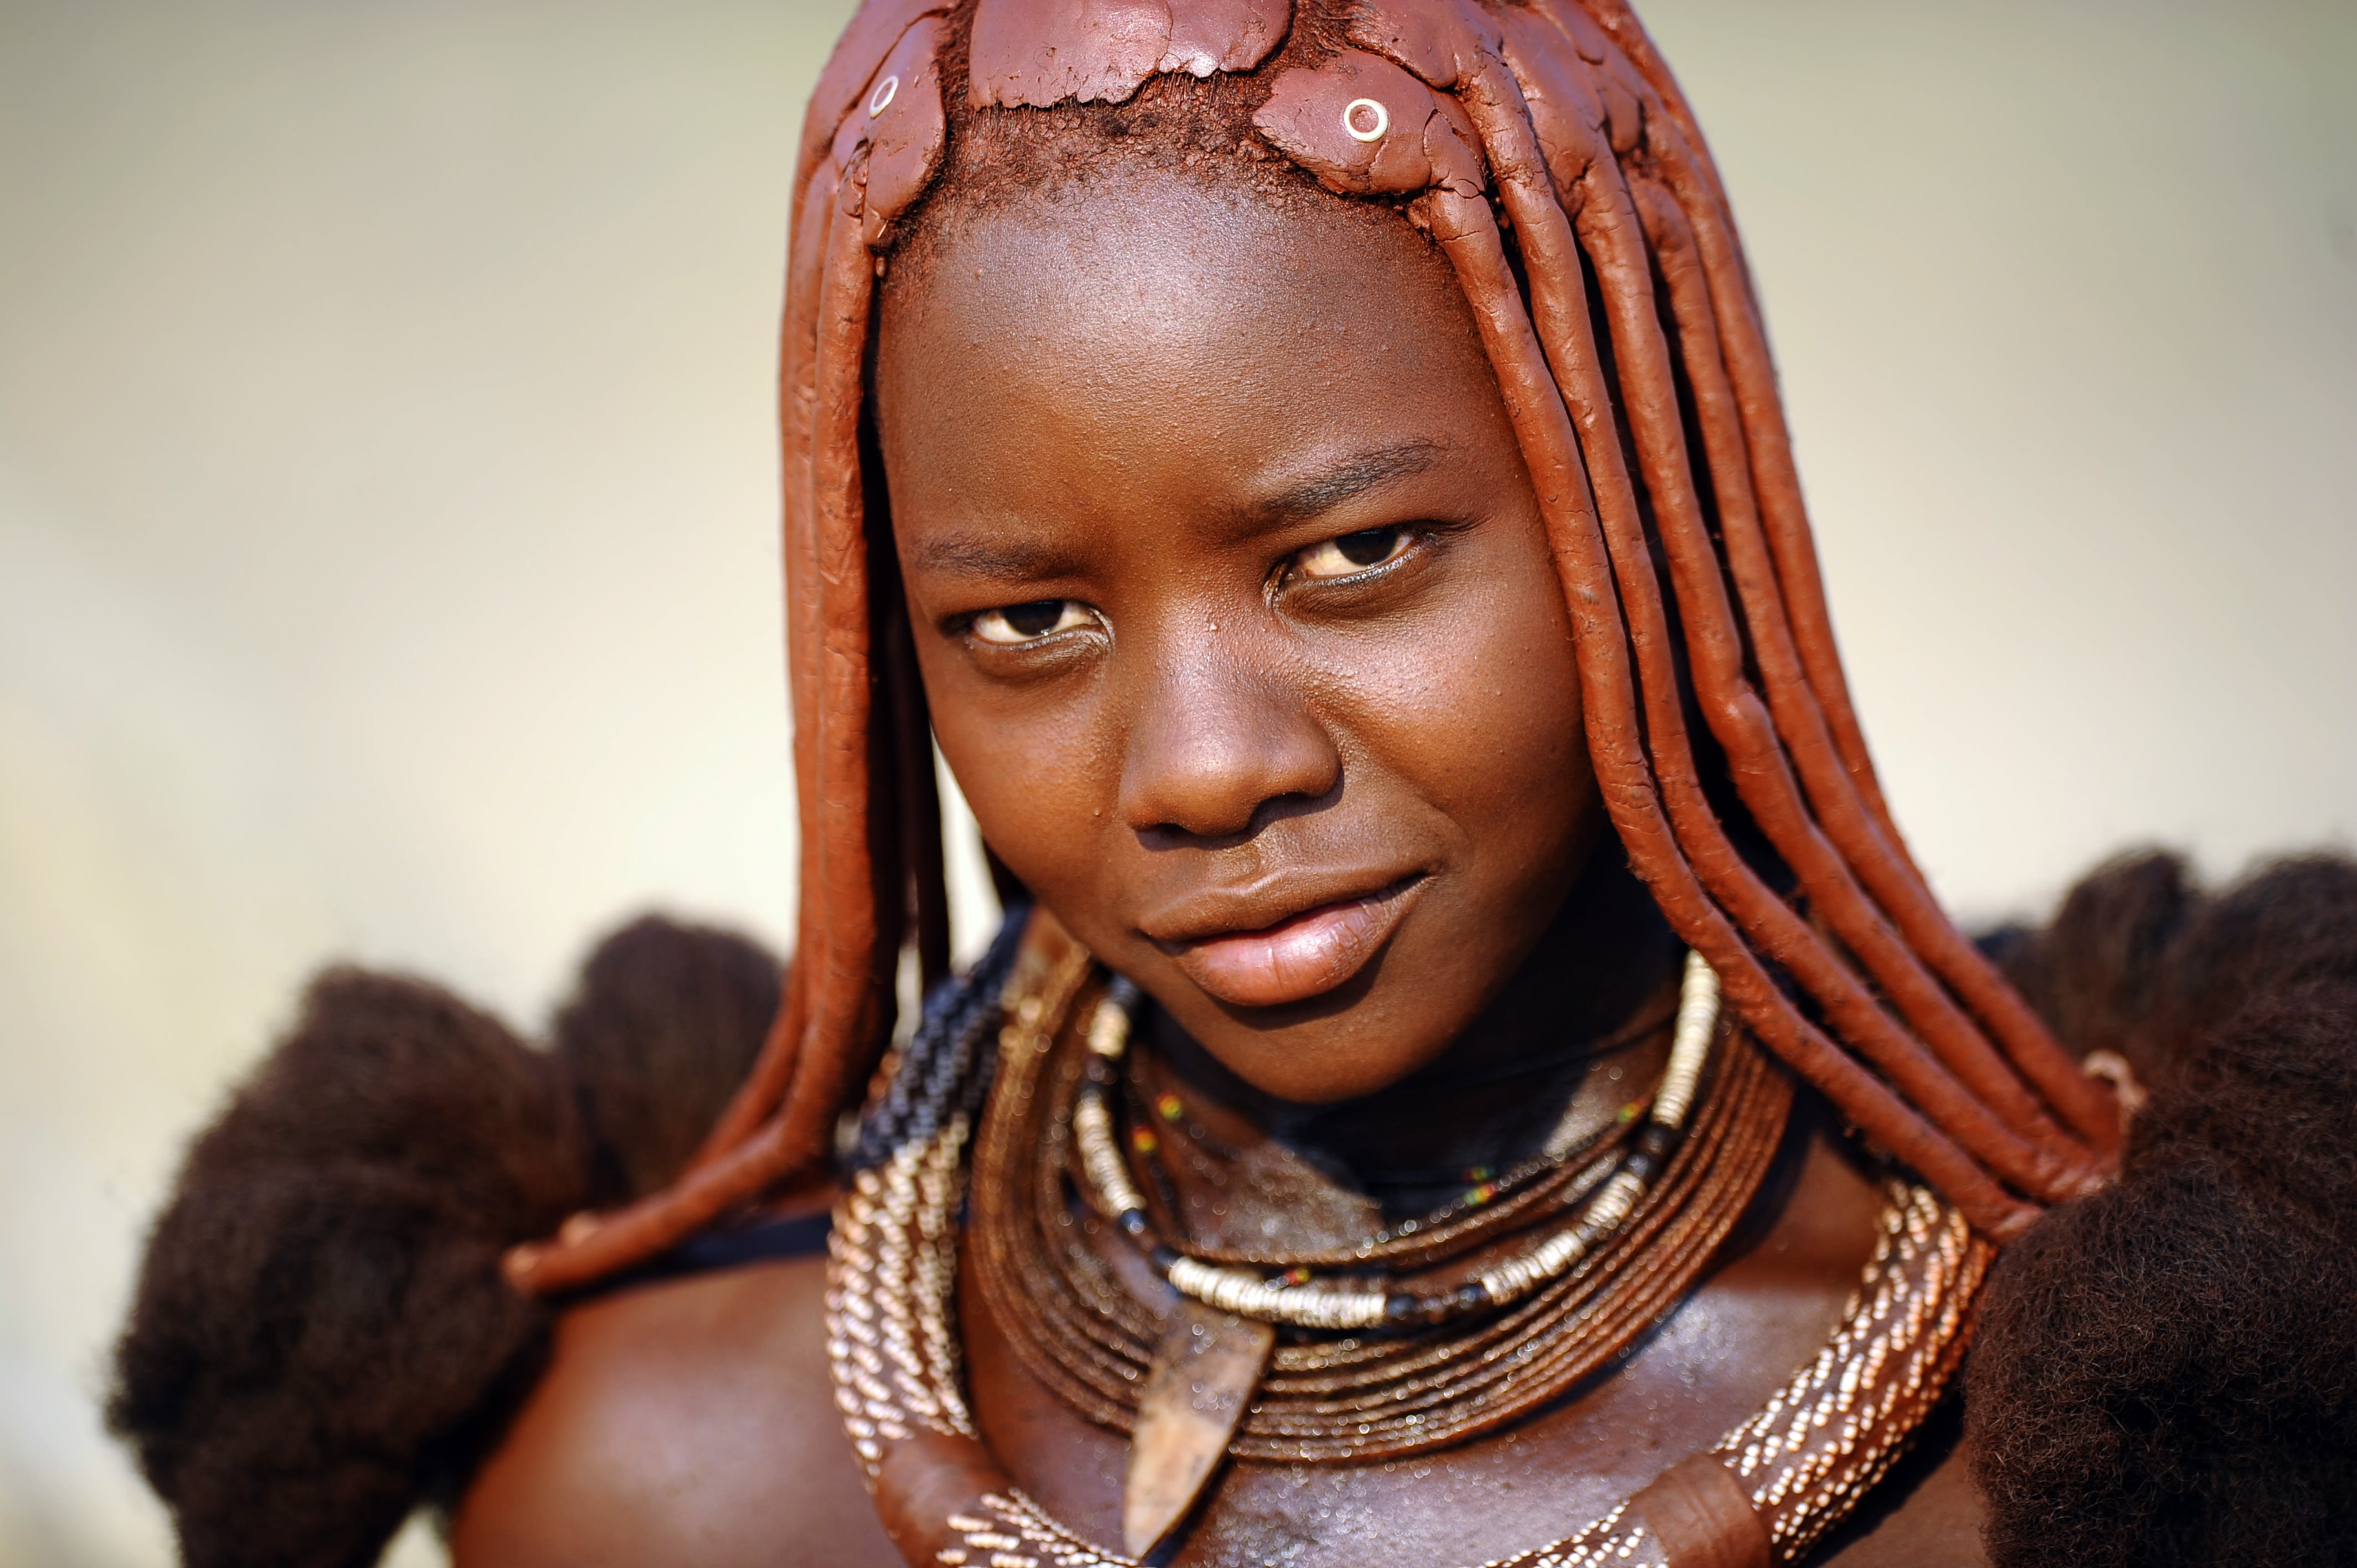 ancient tribes of africa